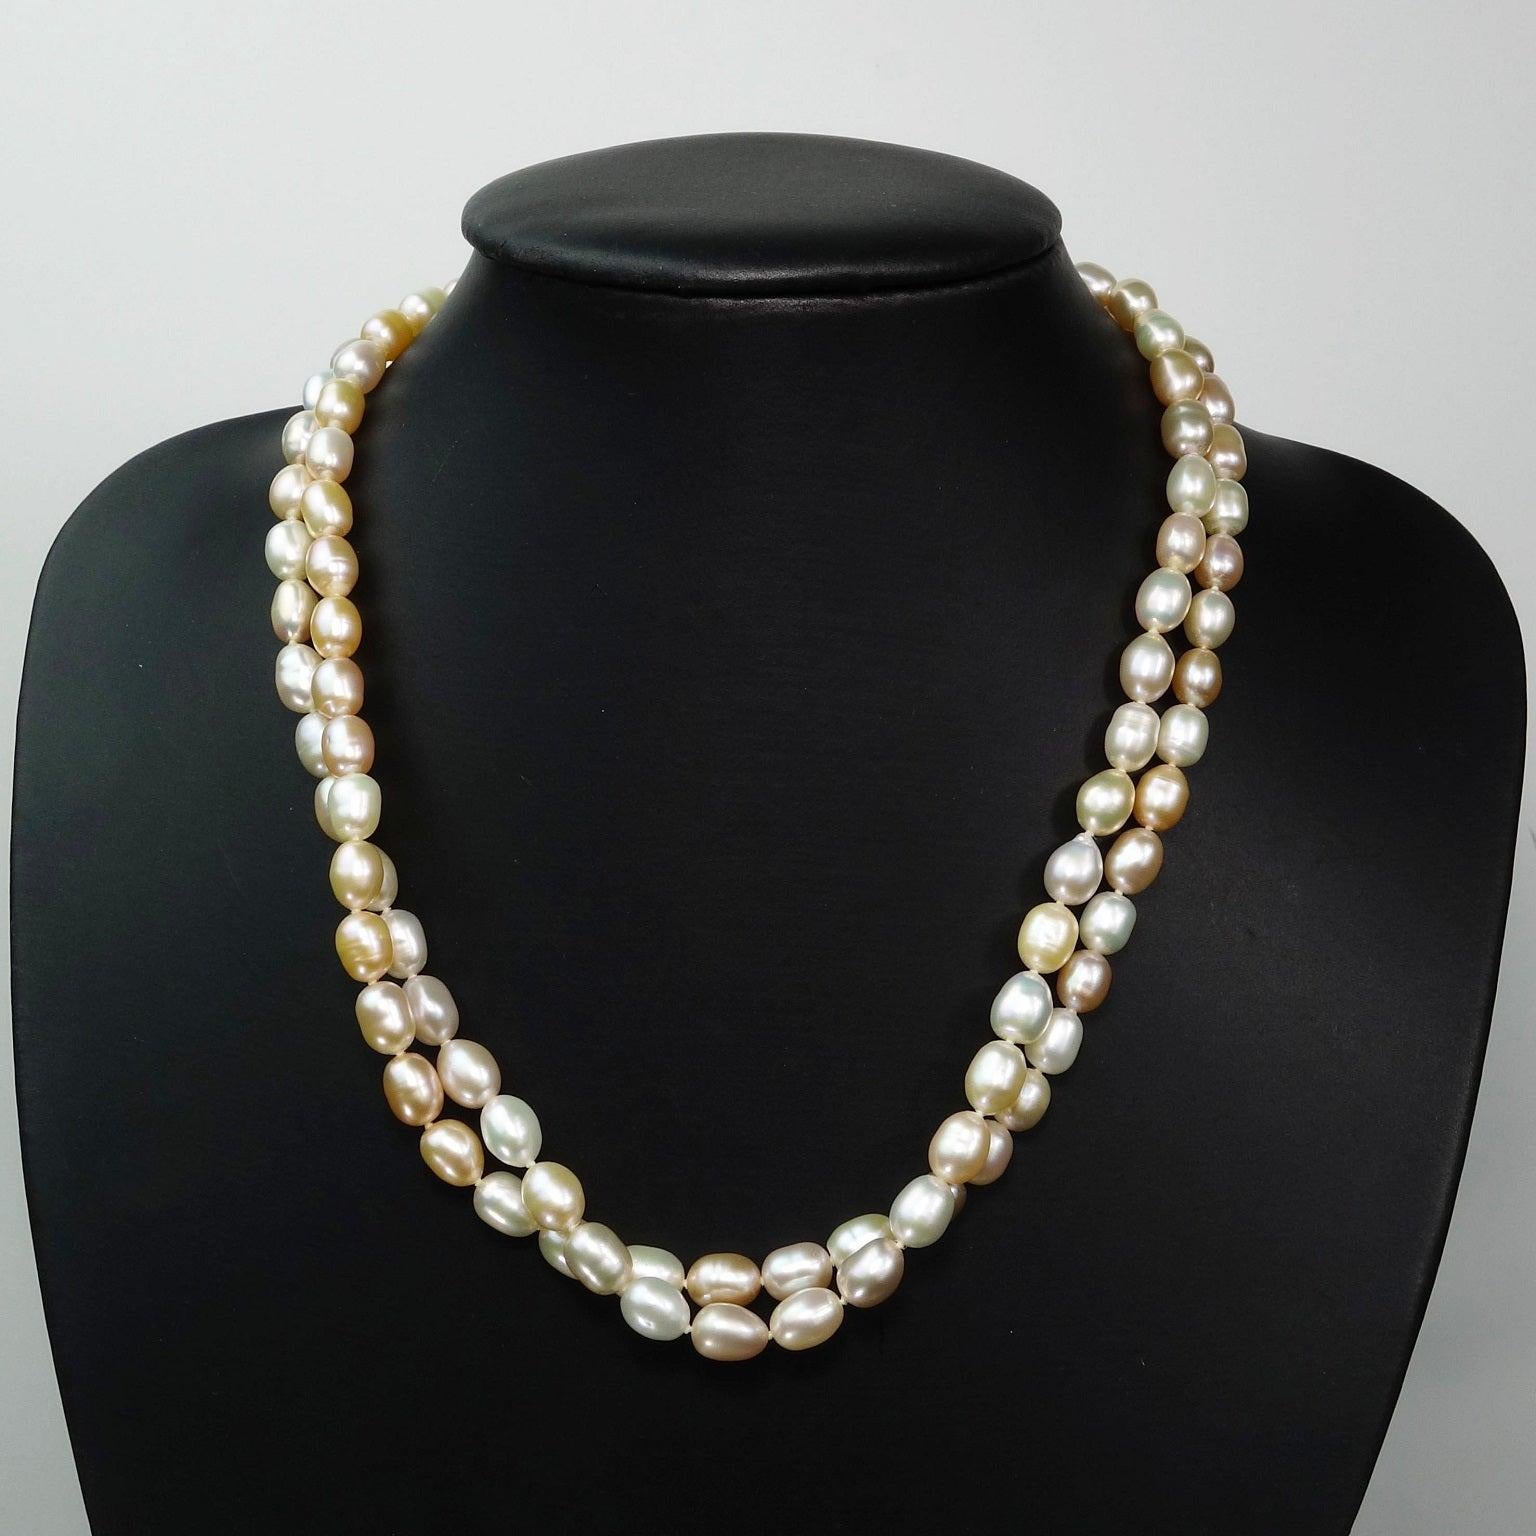 Bead Gemjunky Double Strand Peach Color Freshwater Pearl Necklace